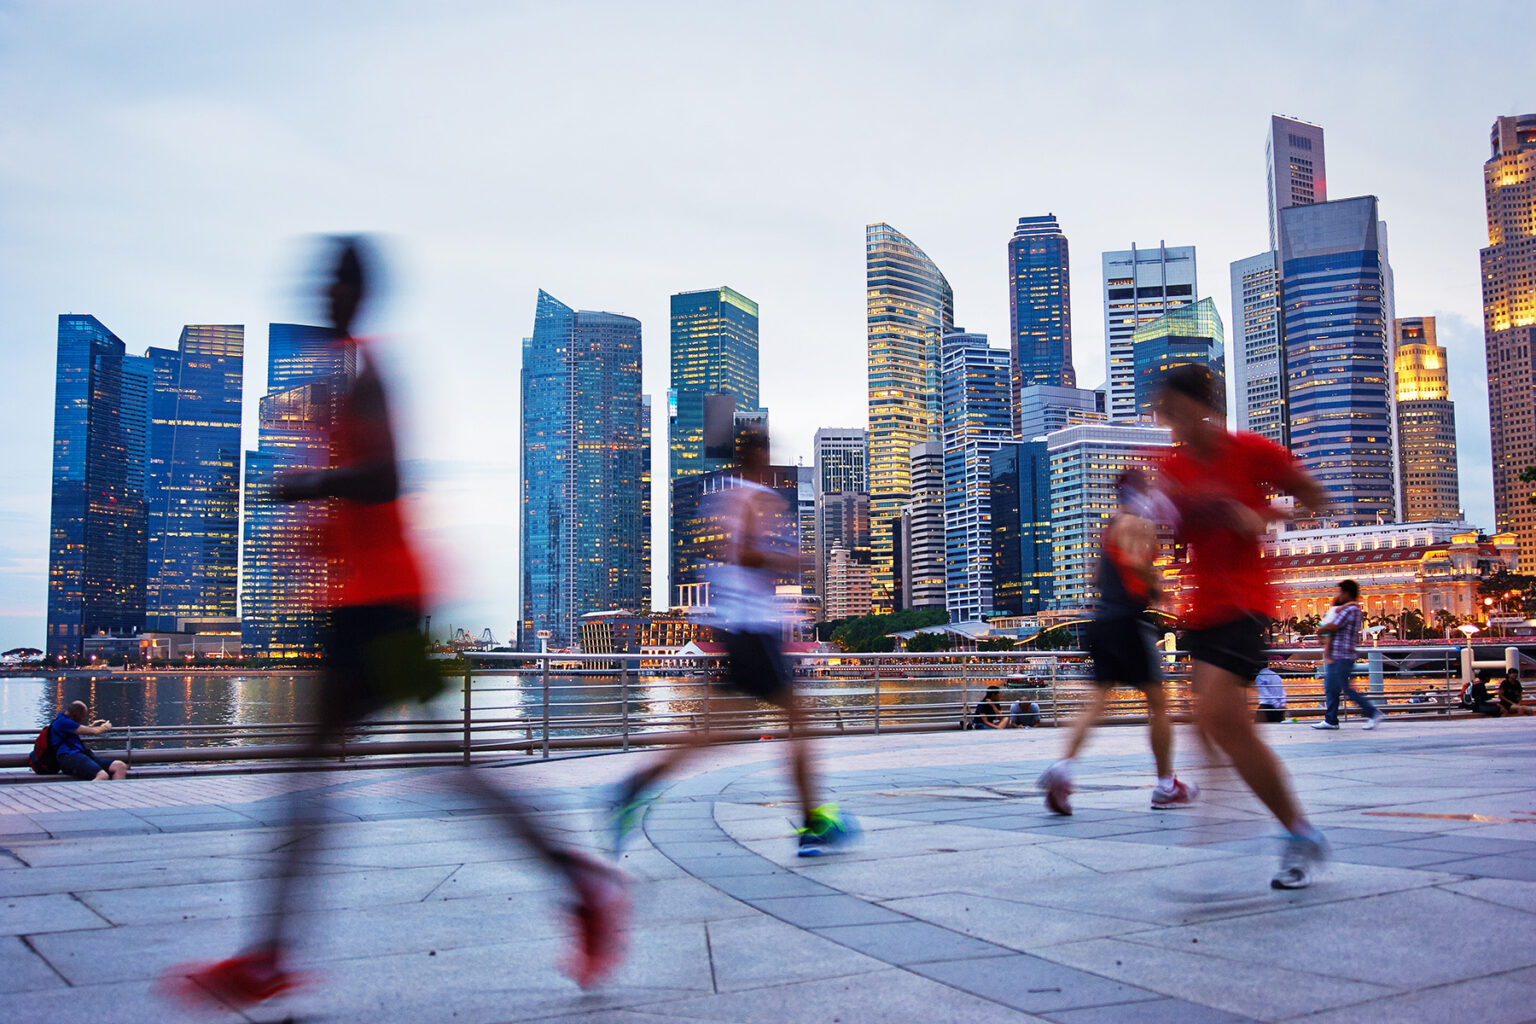 Blurry people running on the boulevard, with Singapore skyscrapers in the background